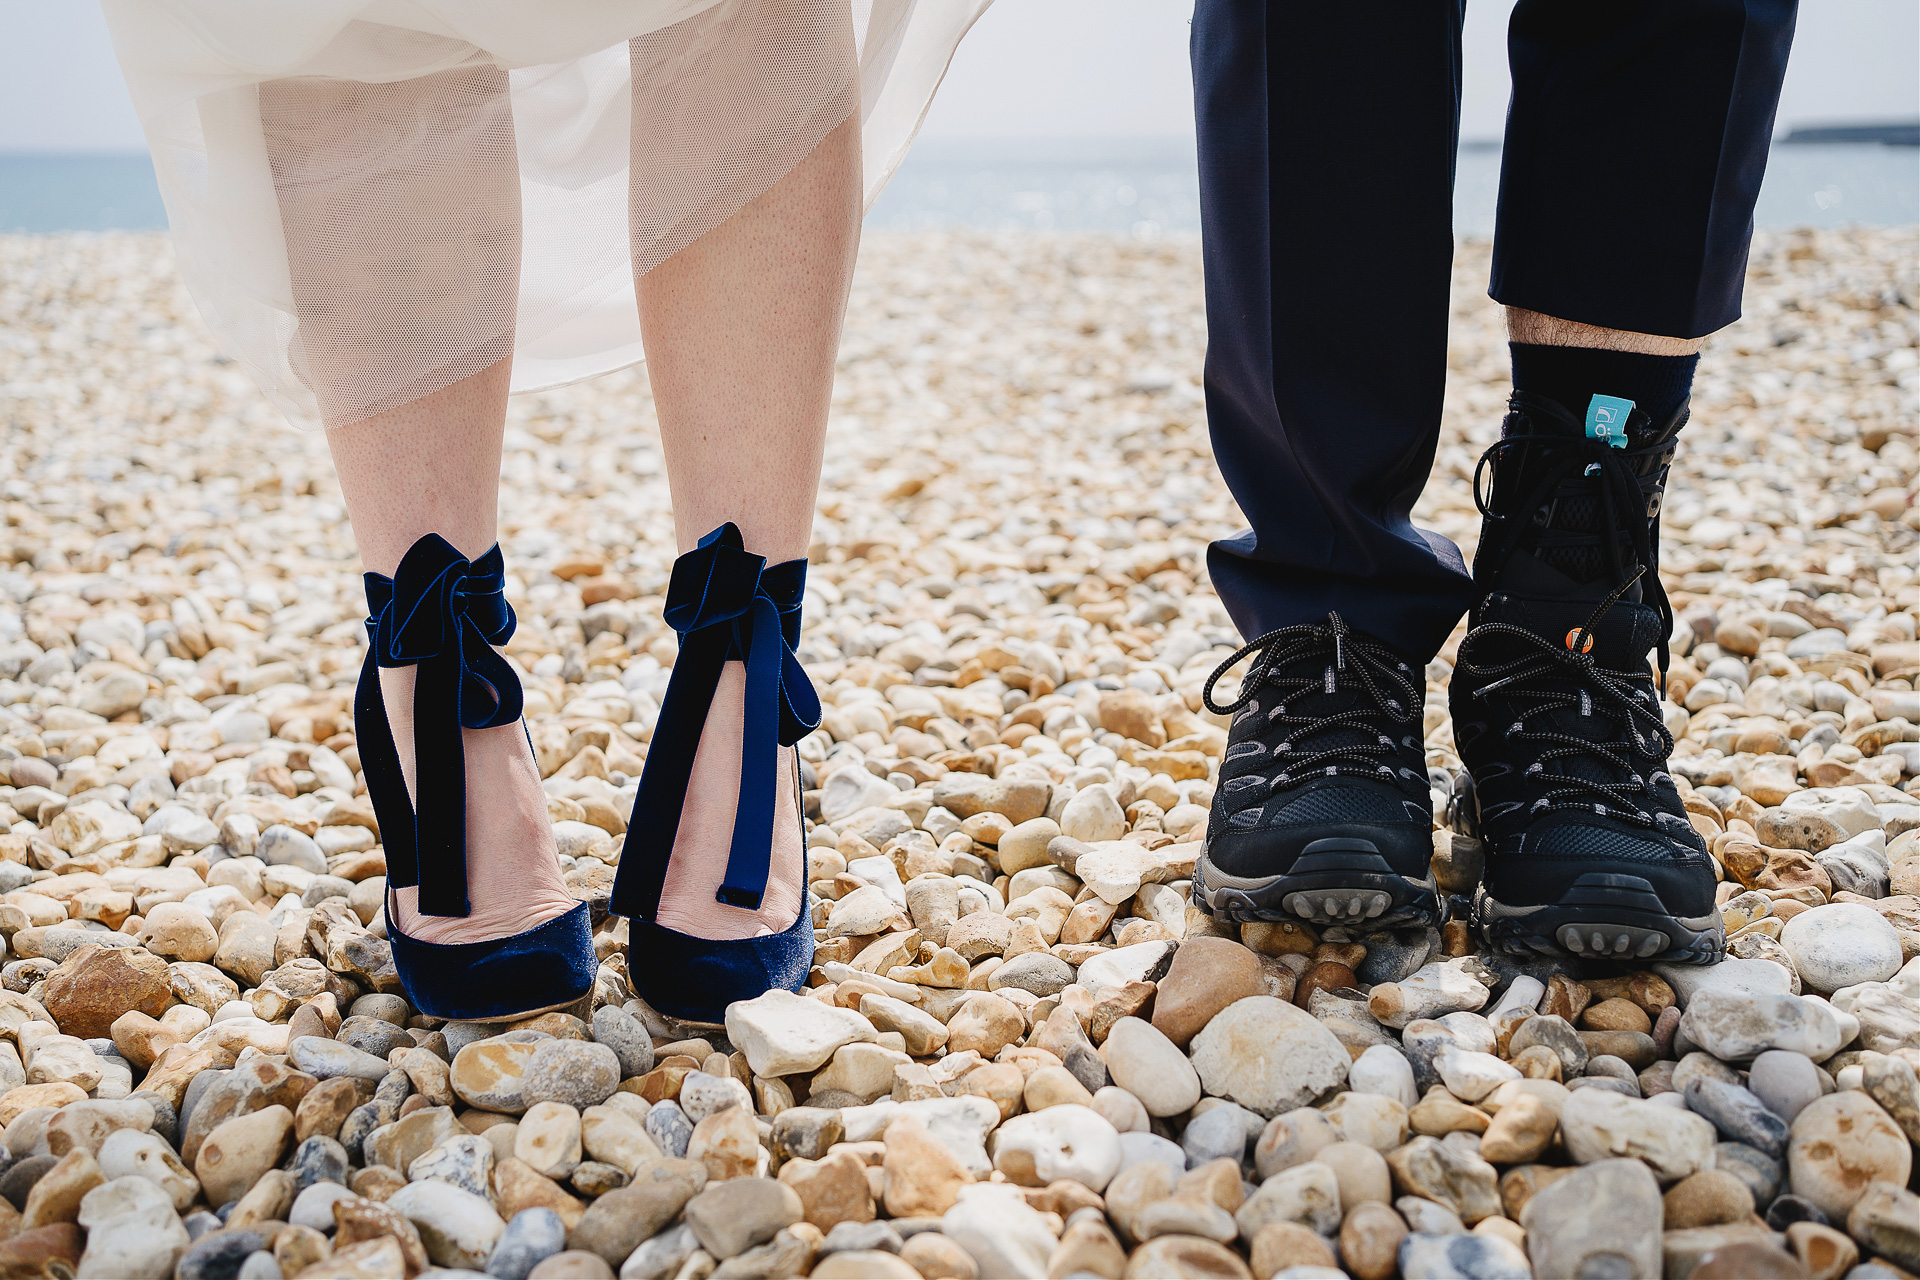 Bride's feet with beautiful velvet blue shoes on a pebble beach